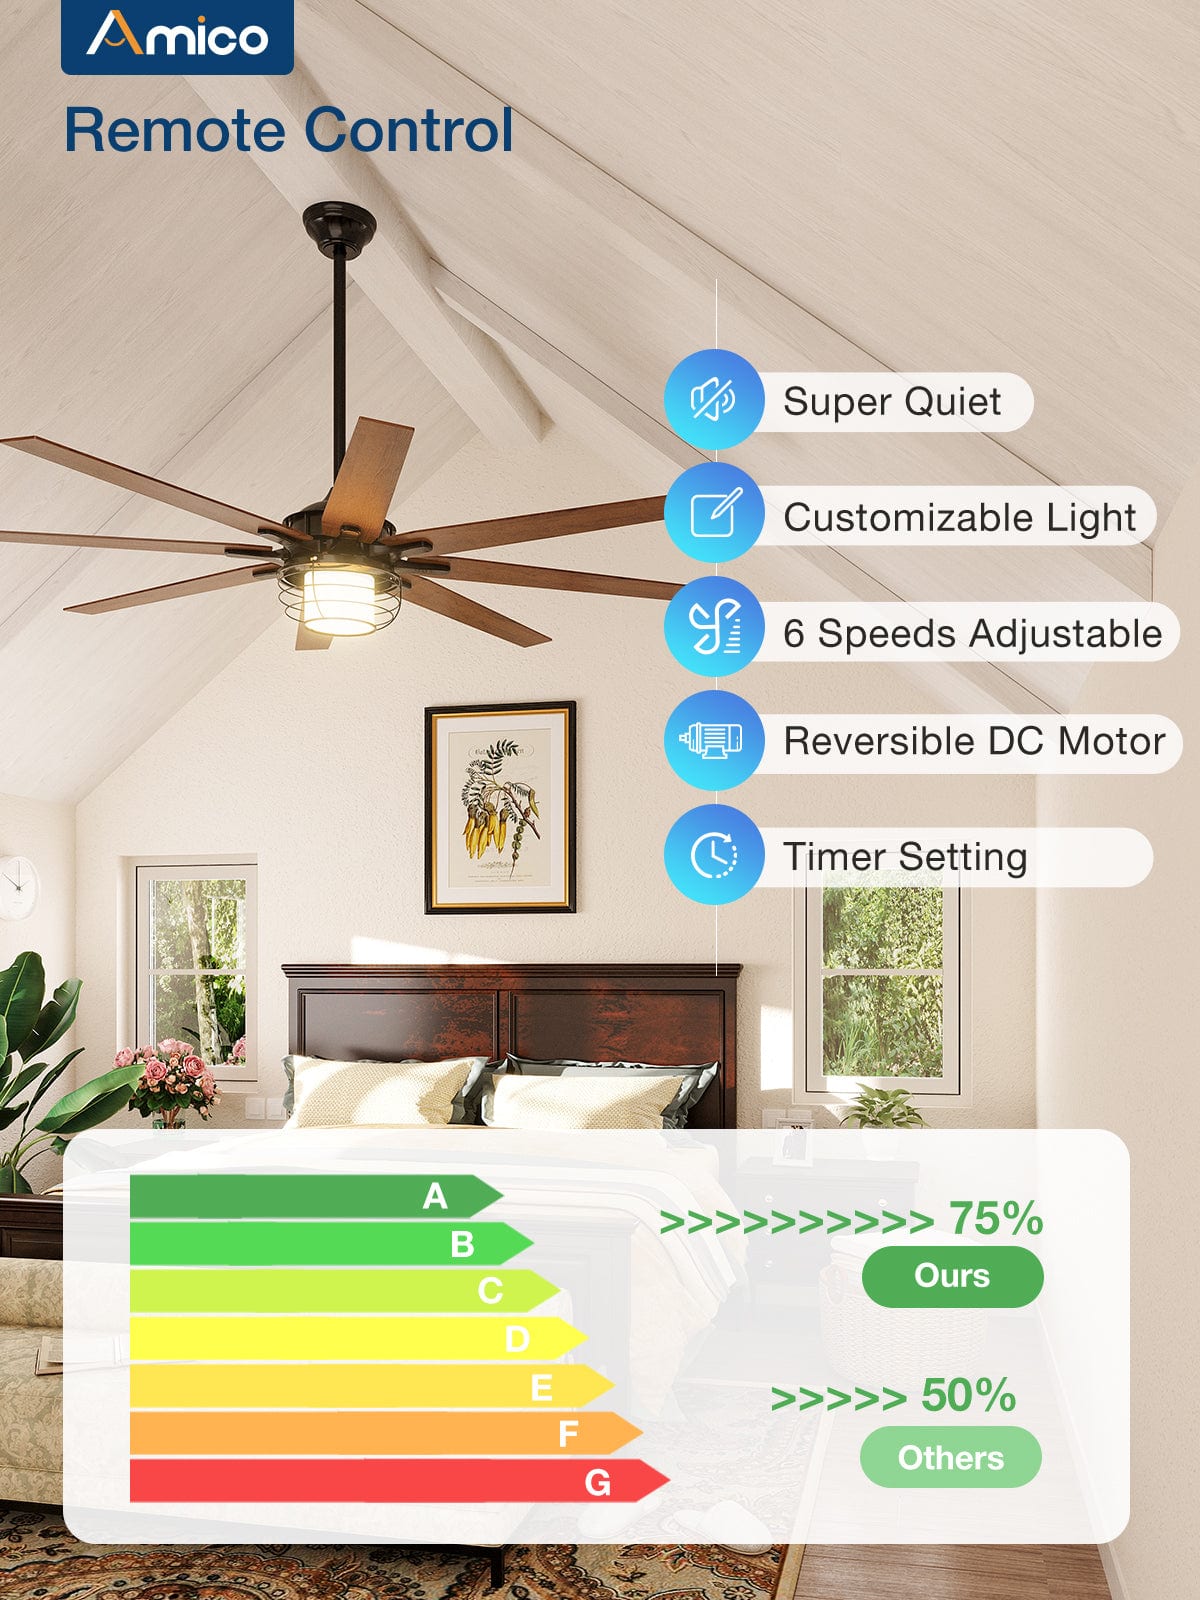 Main Parameters of DC Ceiling Fan With Dimmable LED Light And Remote: Super quiet, customized lights, 6 speeds adjustable, reversible dc motor, timer setting.